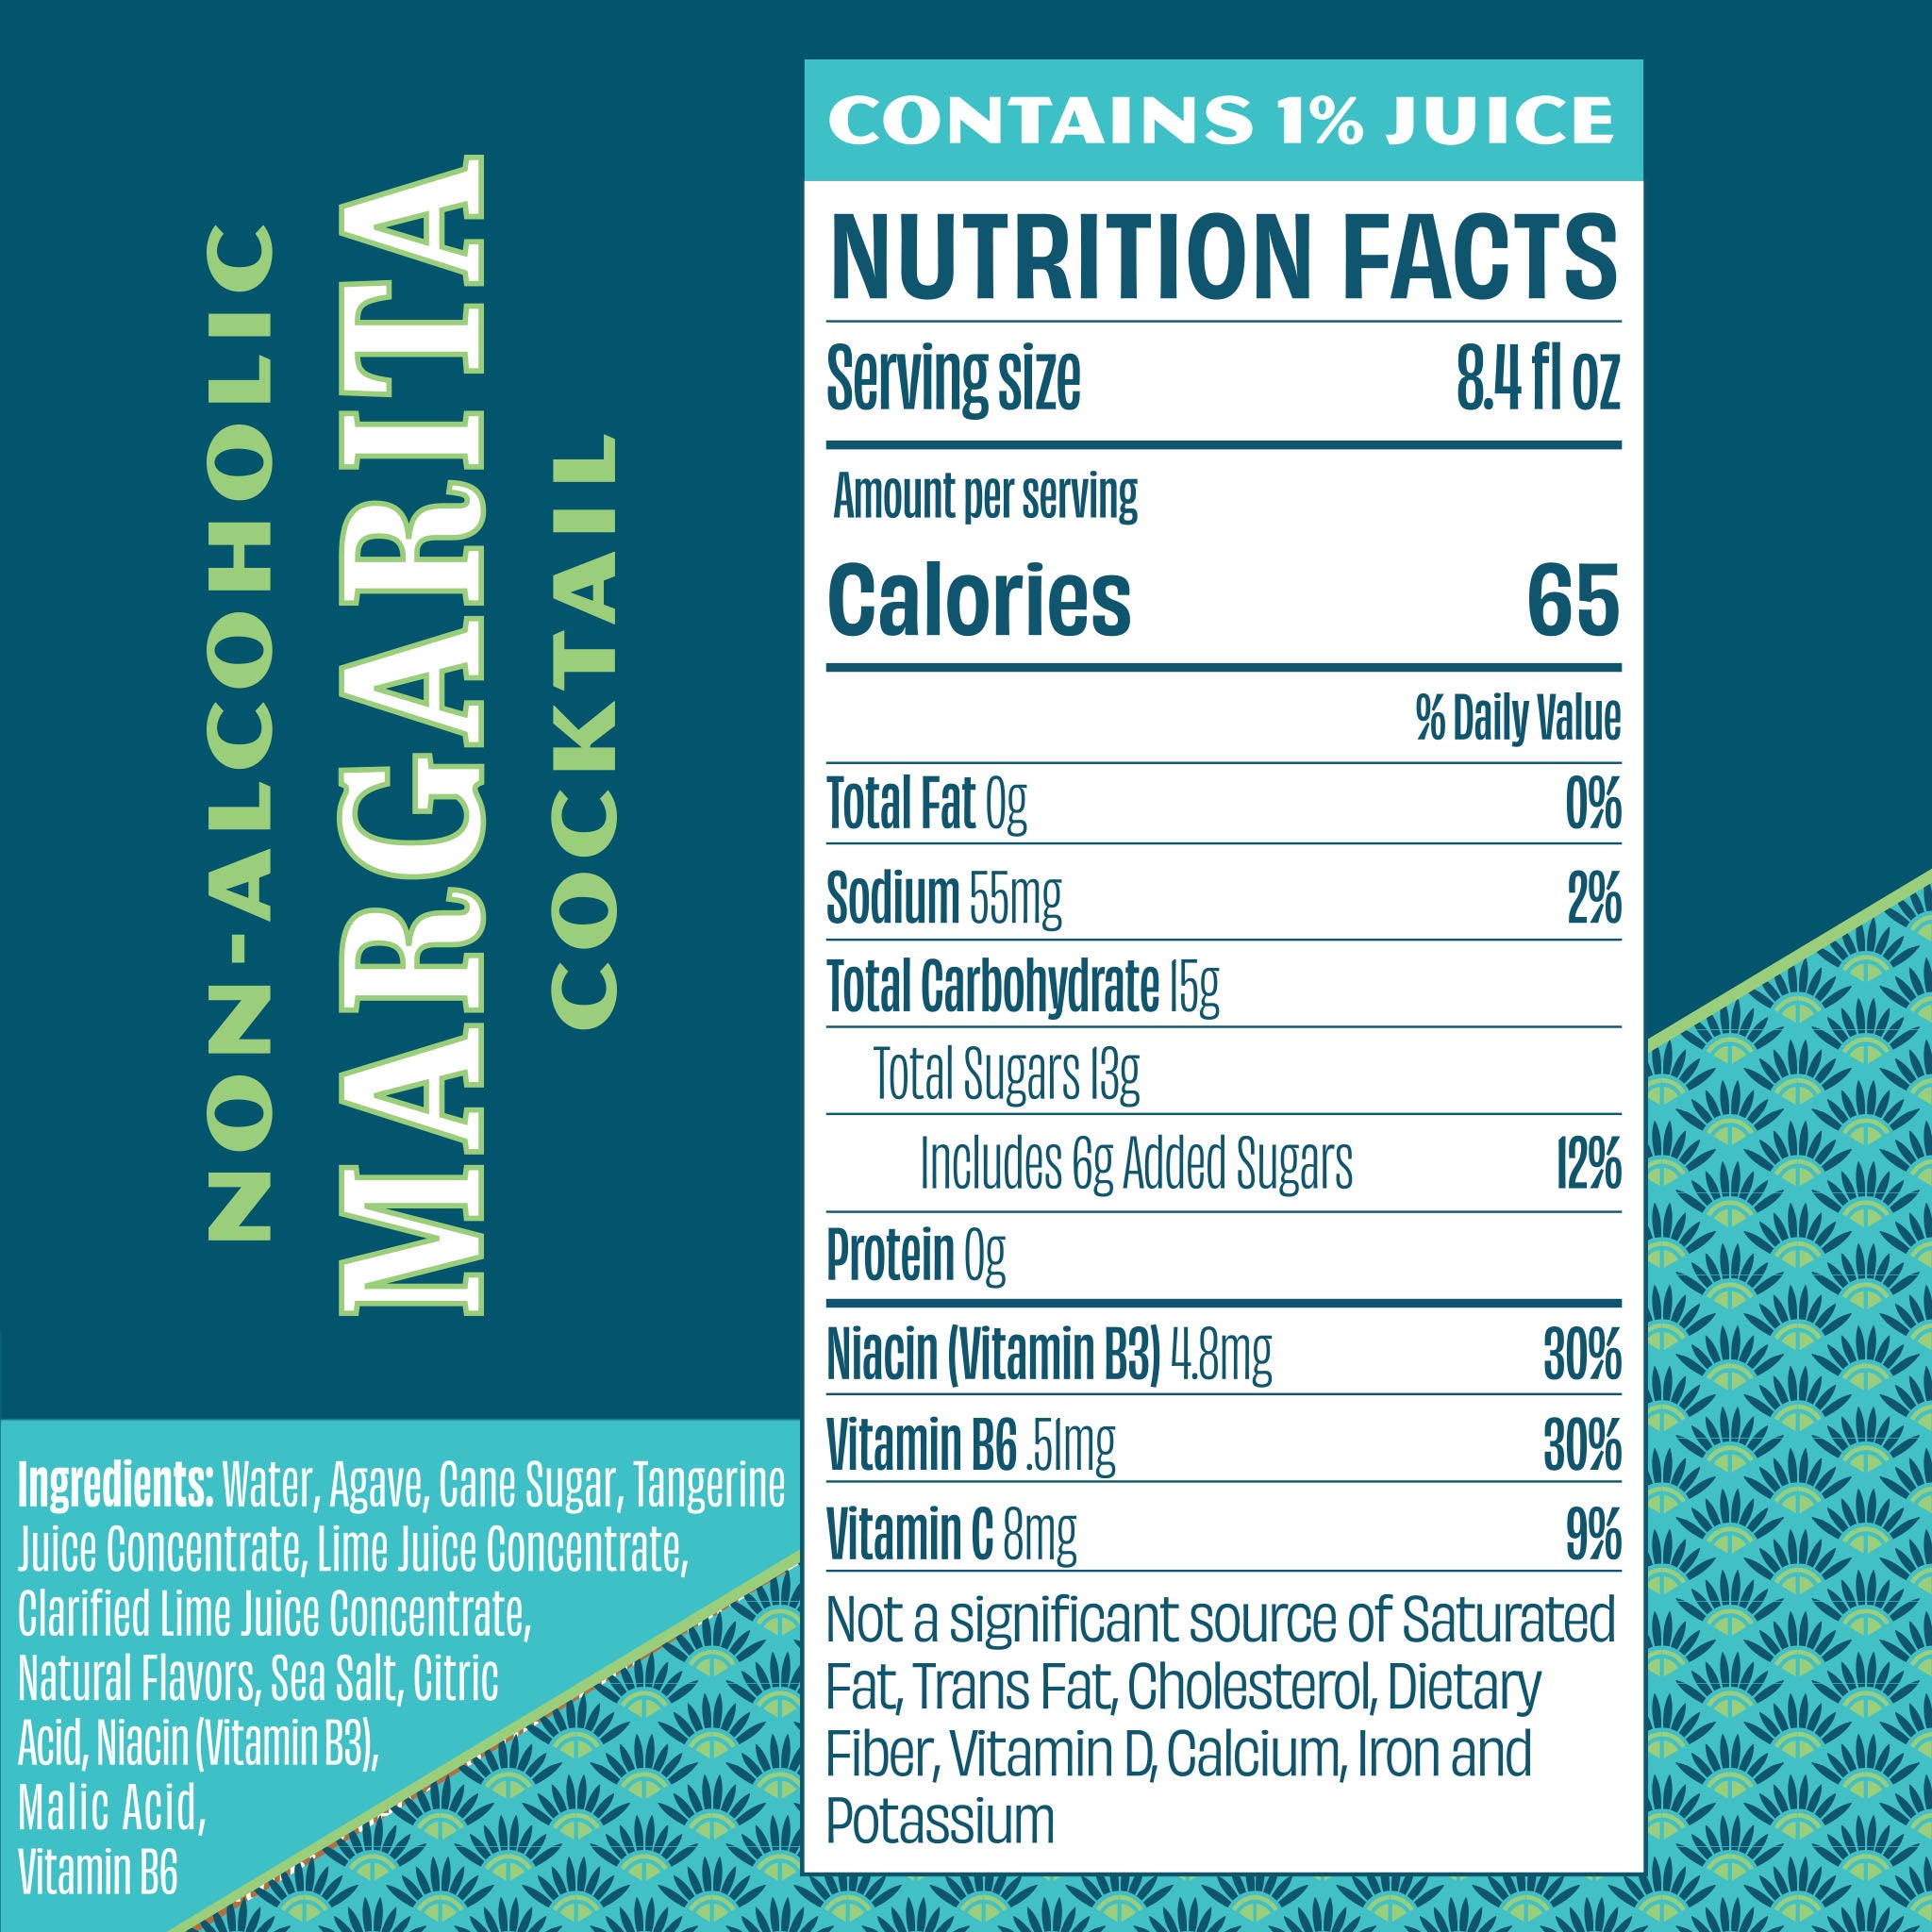 Non-alcoholic Margarita - Ingredients and nutrition info